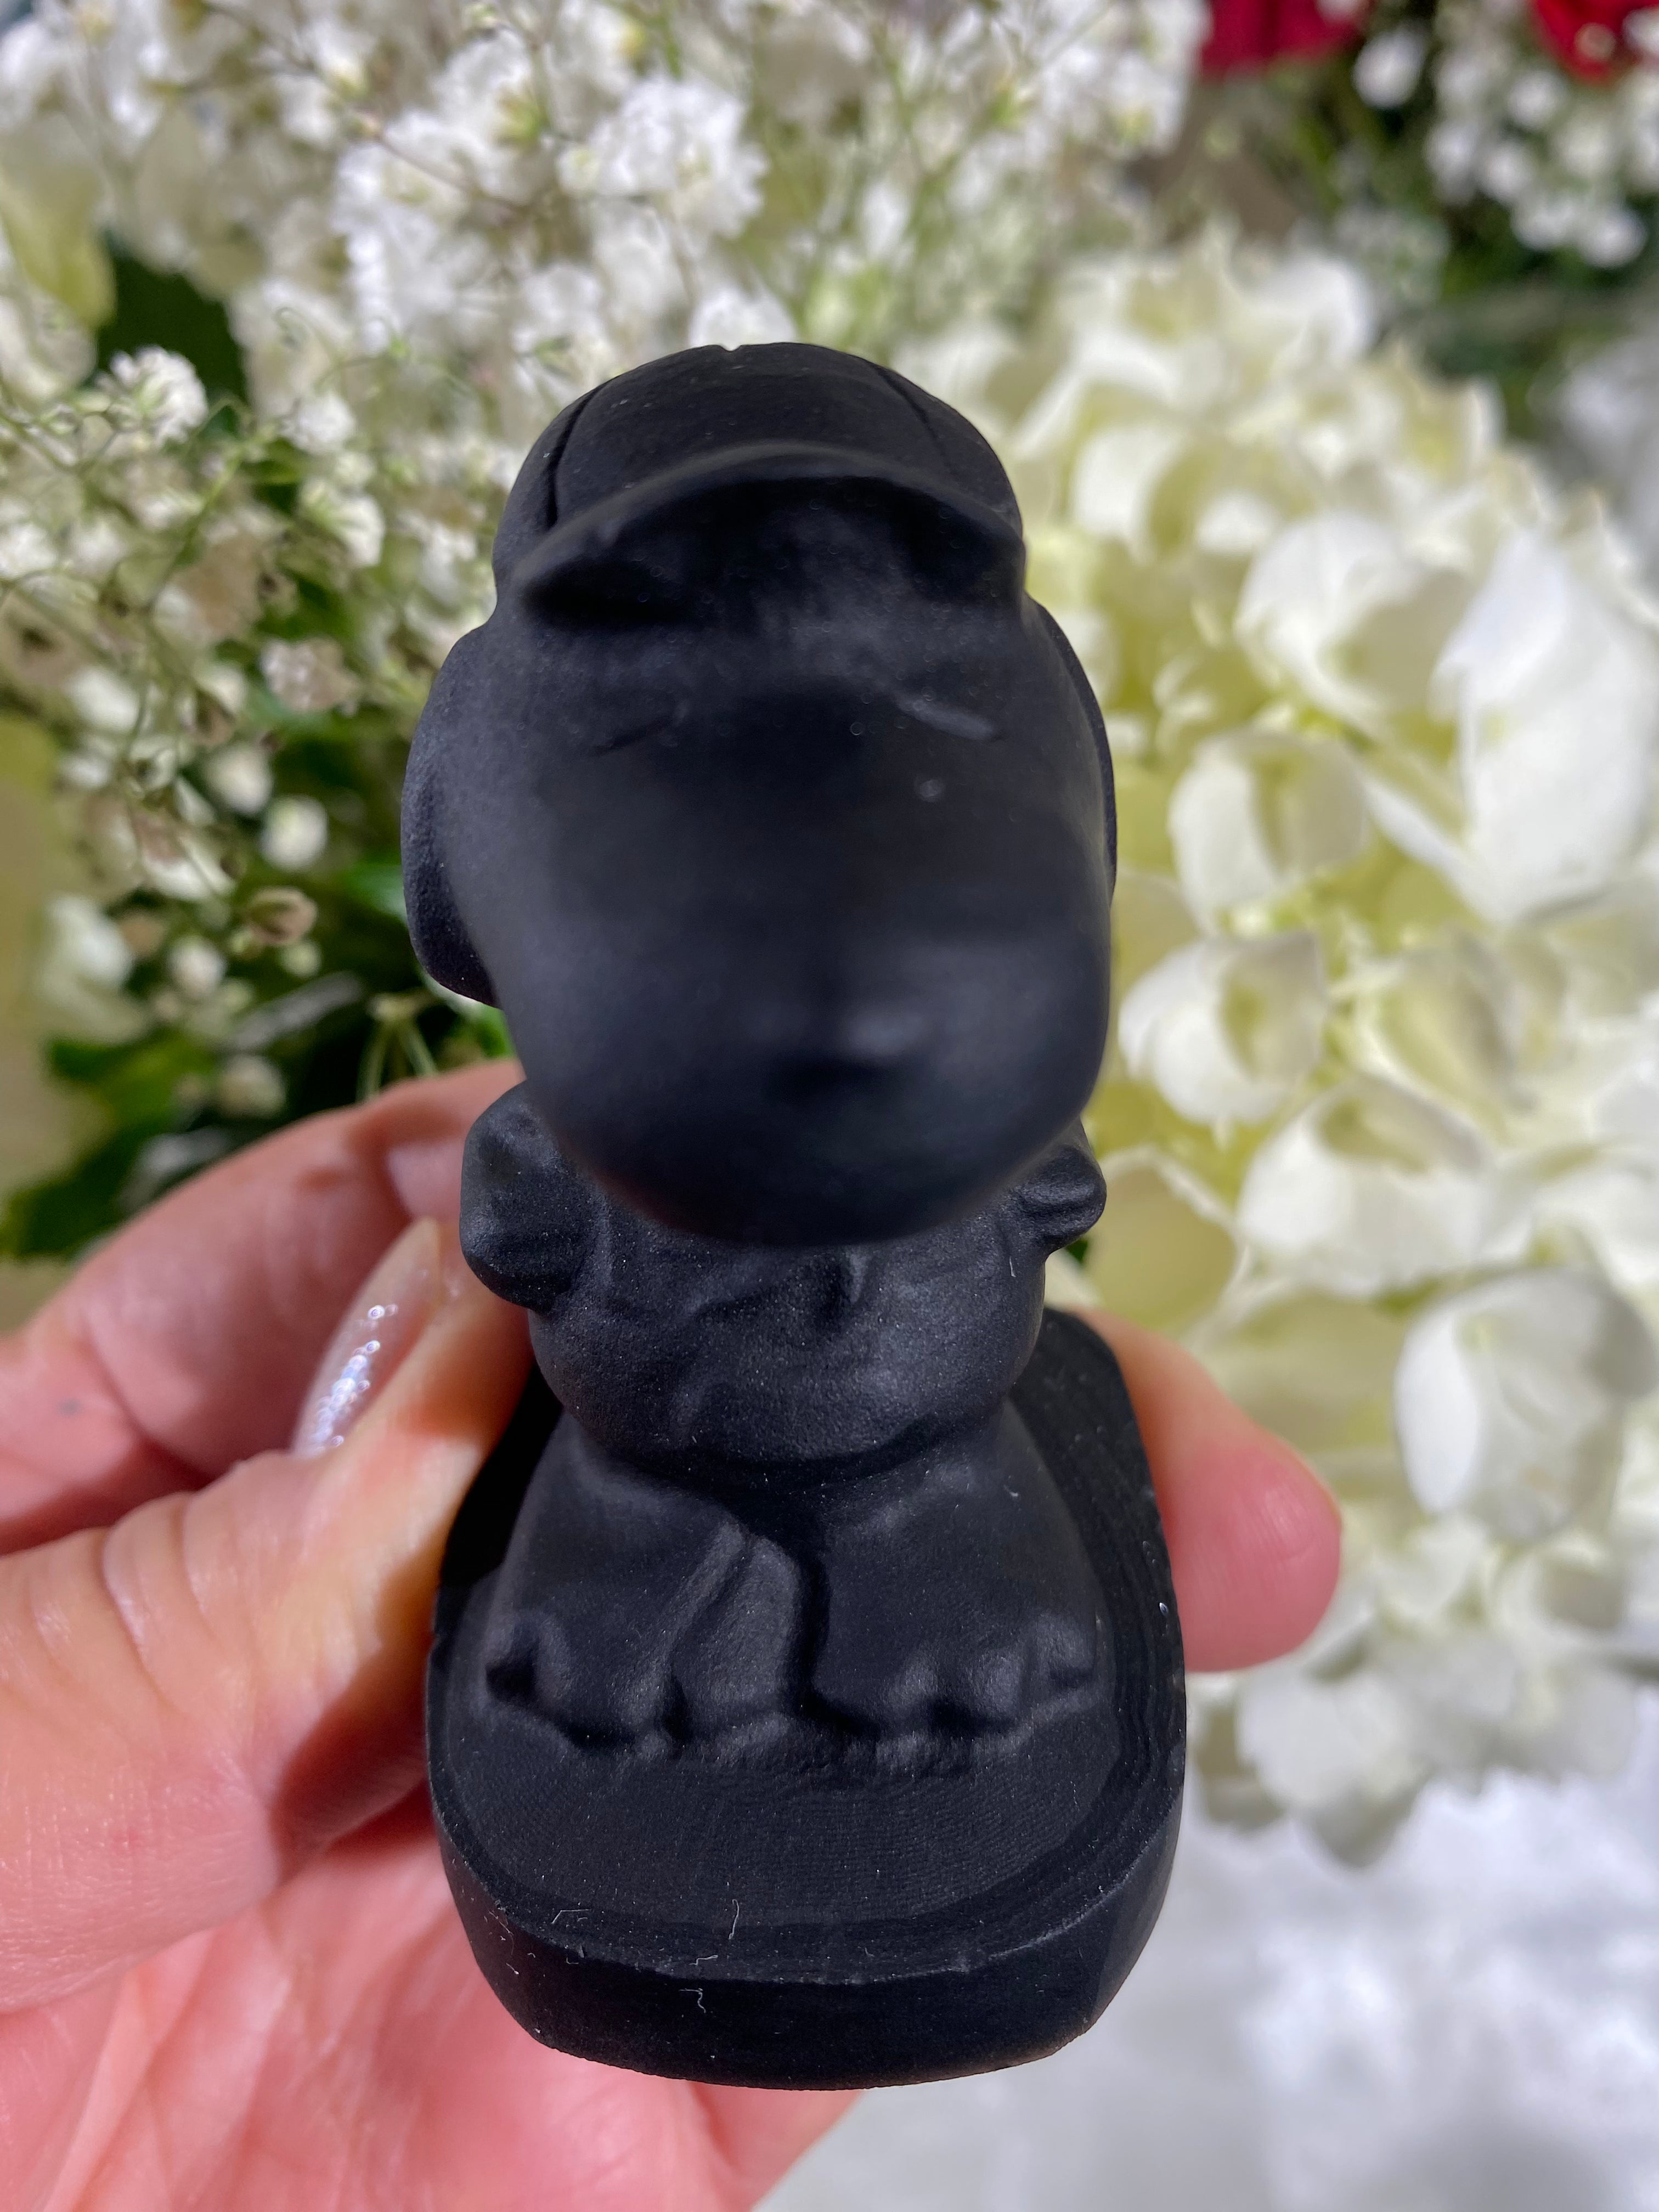 Self-Standing Obsidian Character Carving - Snoopy